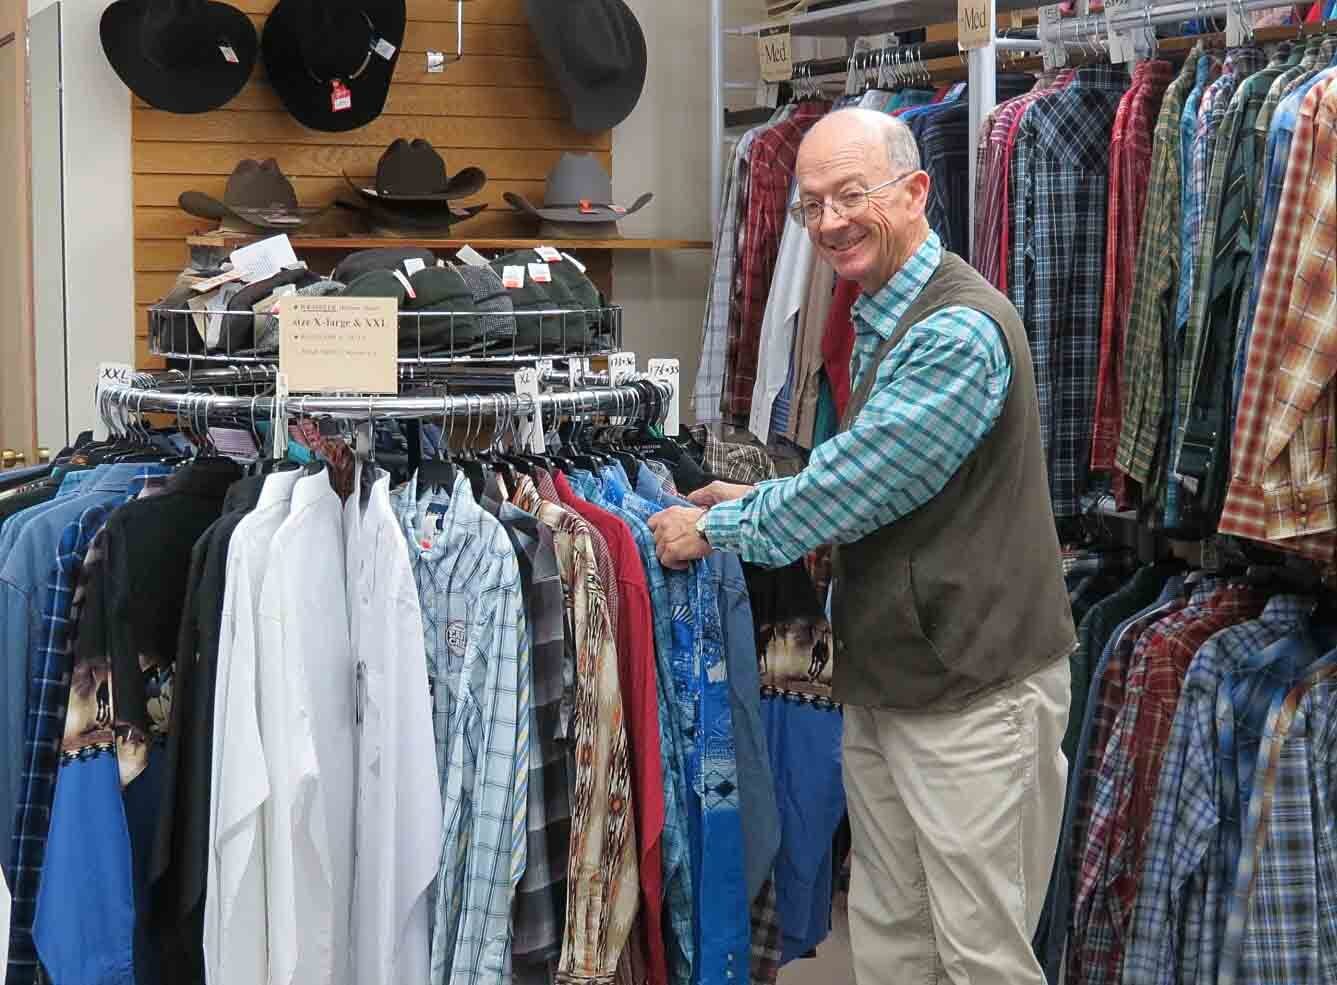 Store Owner Checking the Men's Clothes